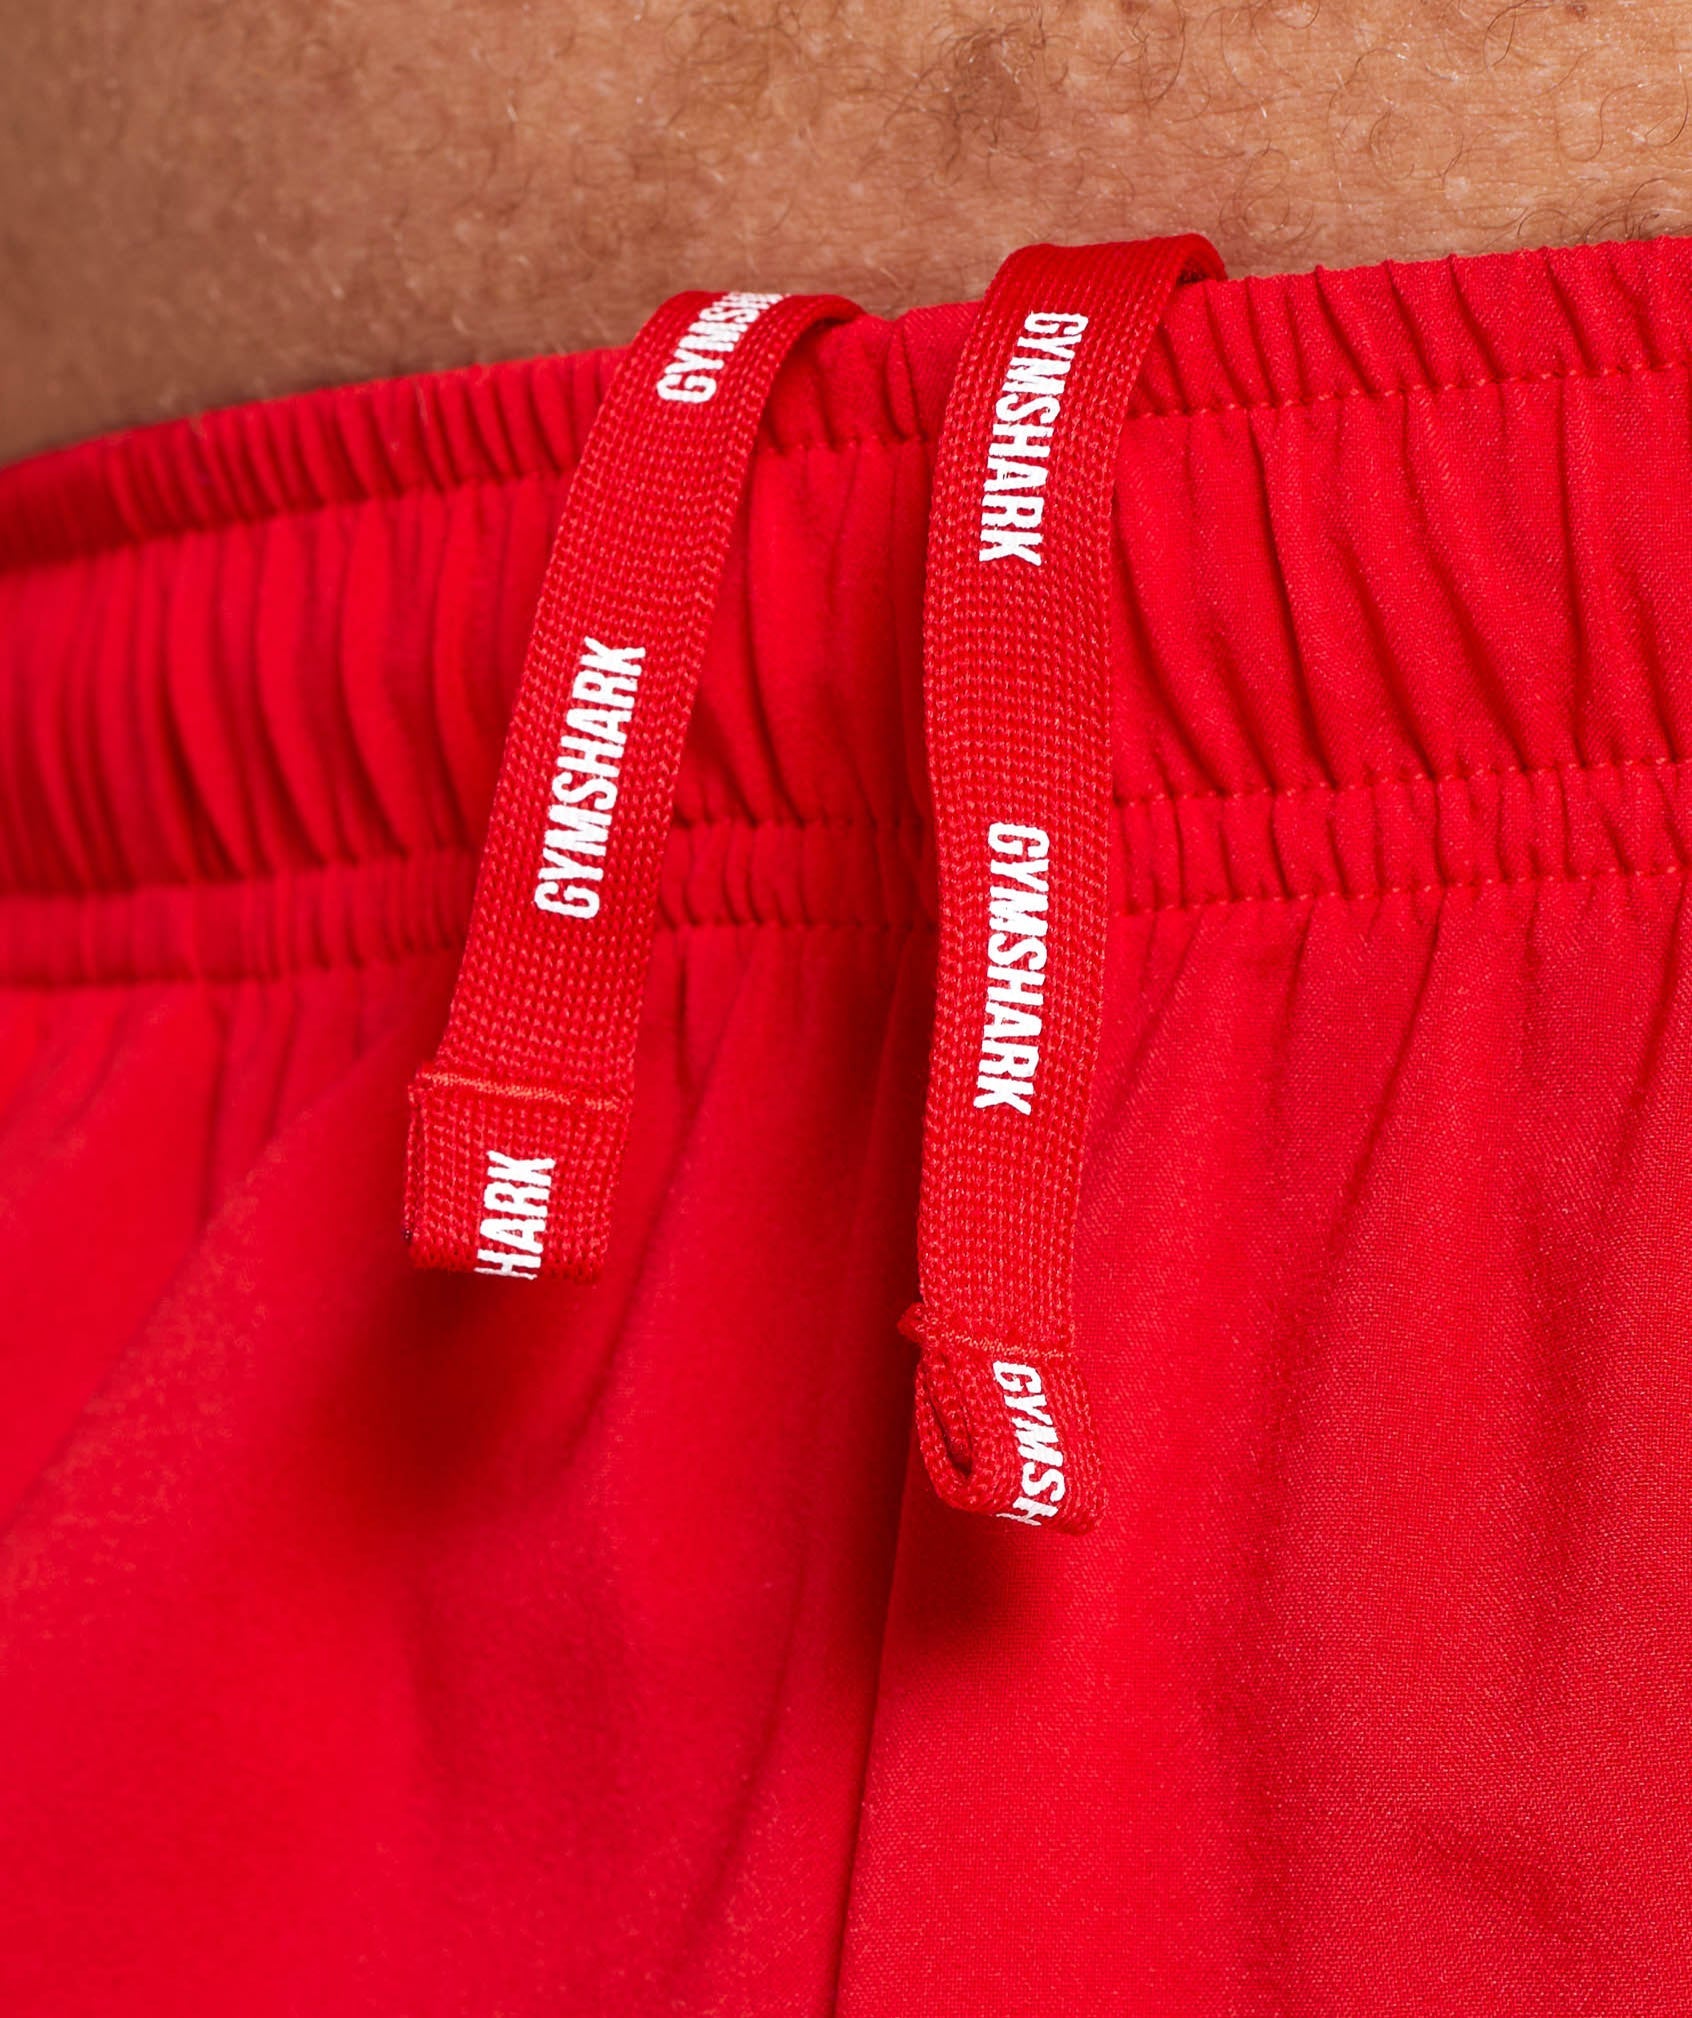 Arrival Shorts in Red - view 5